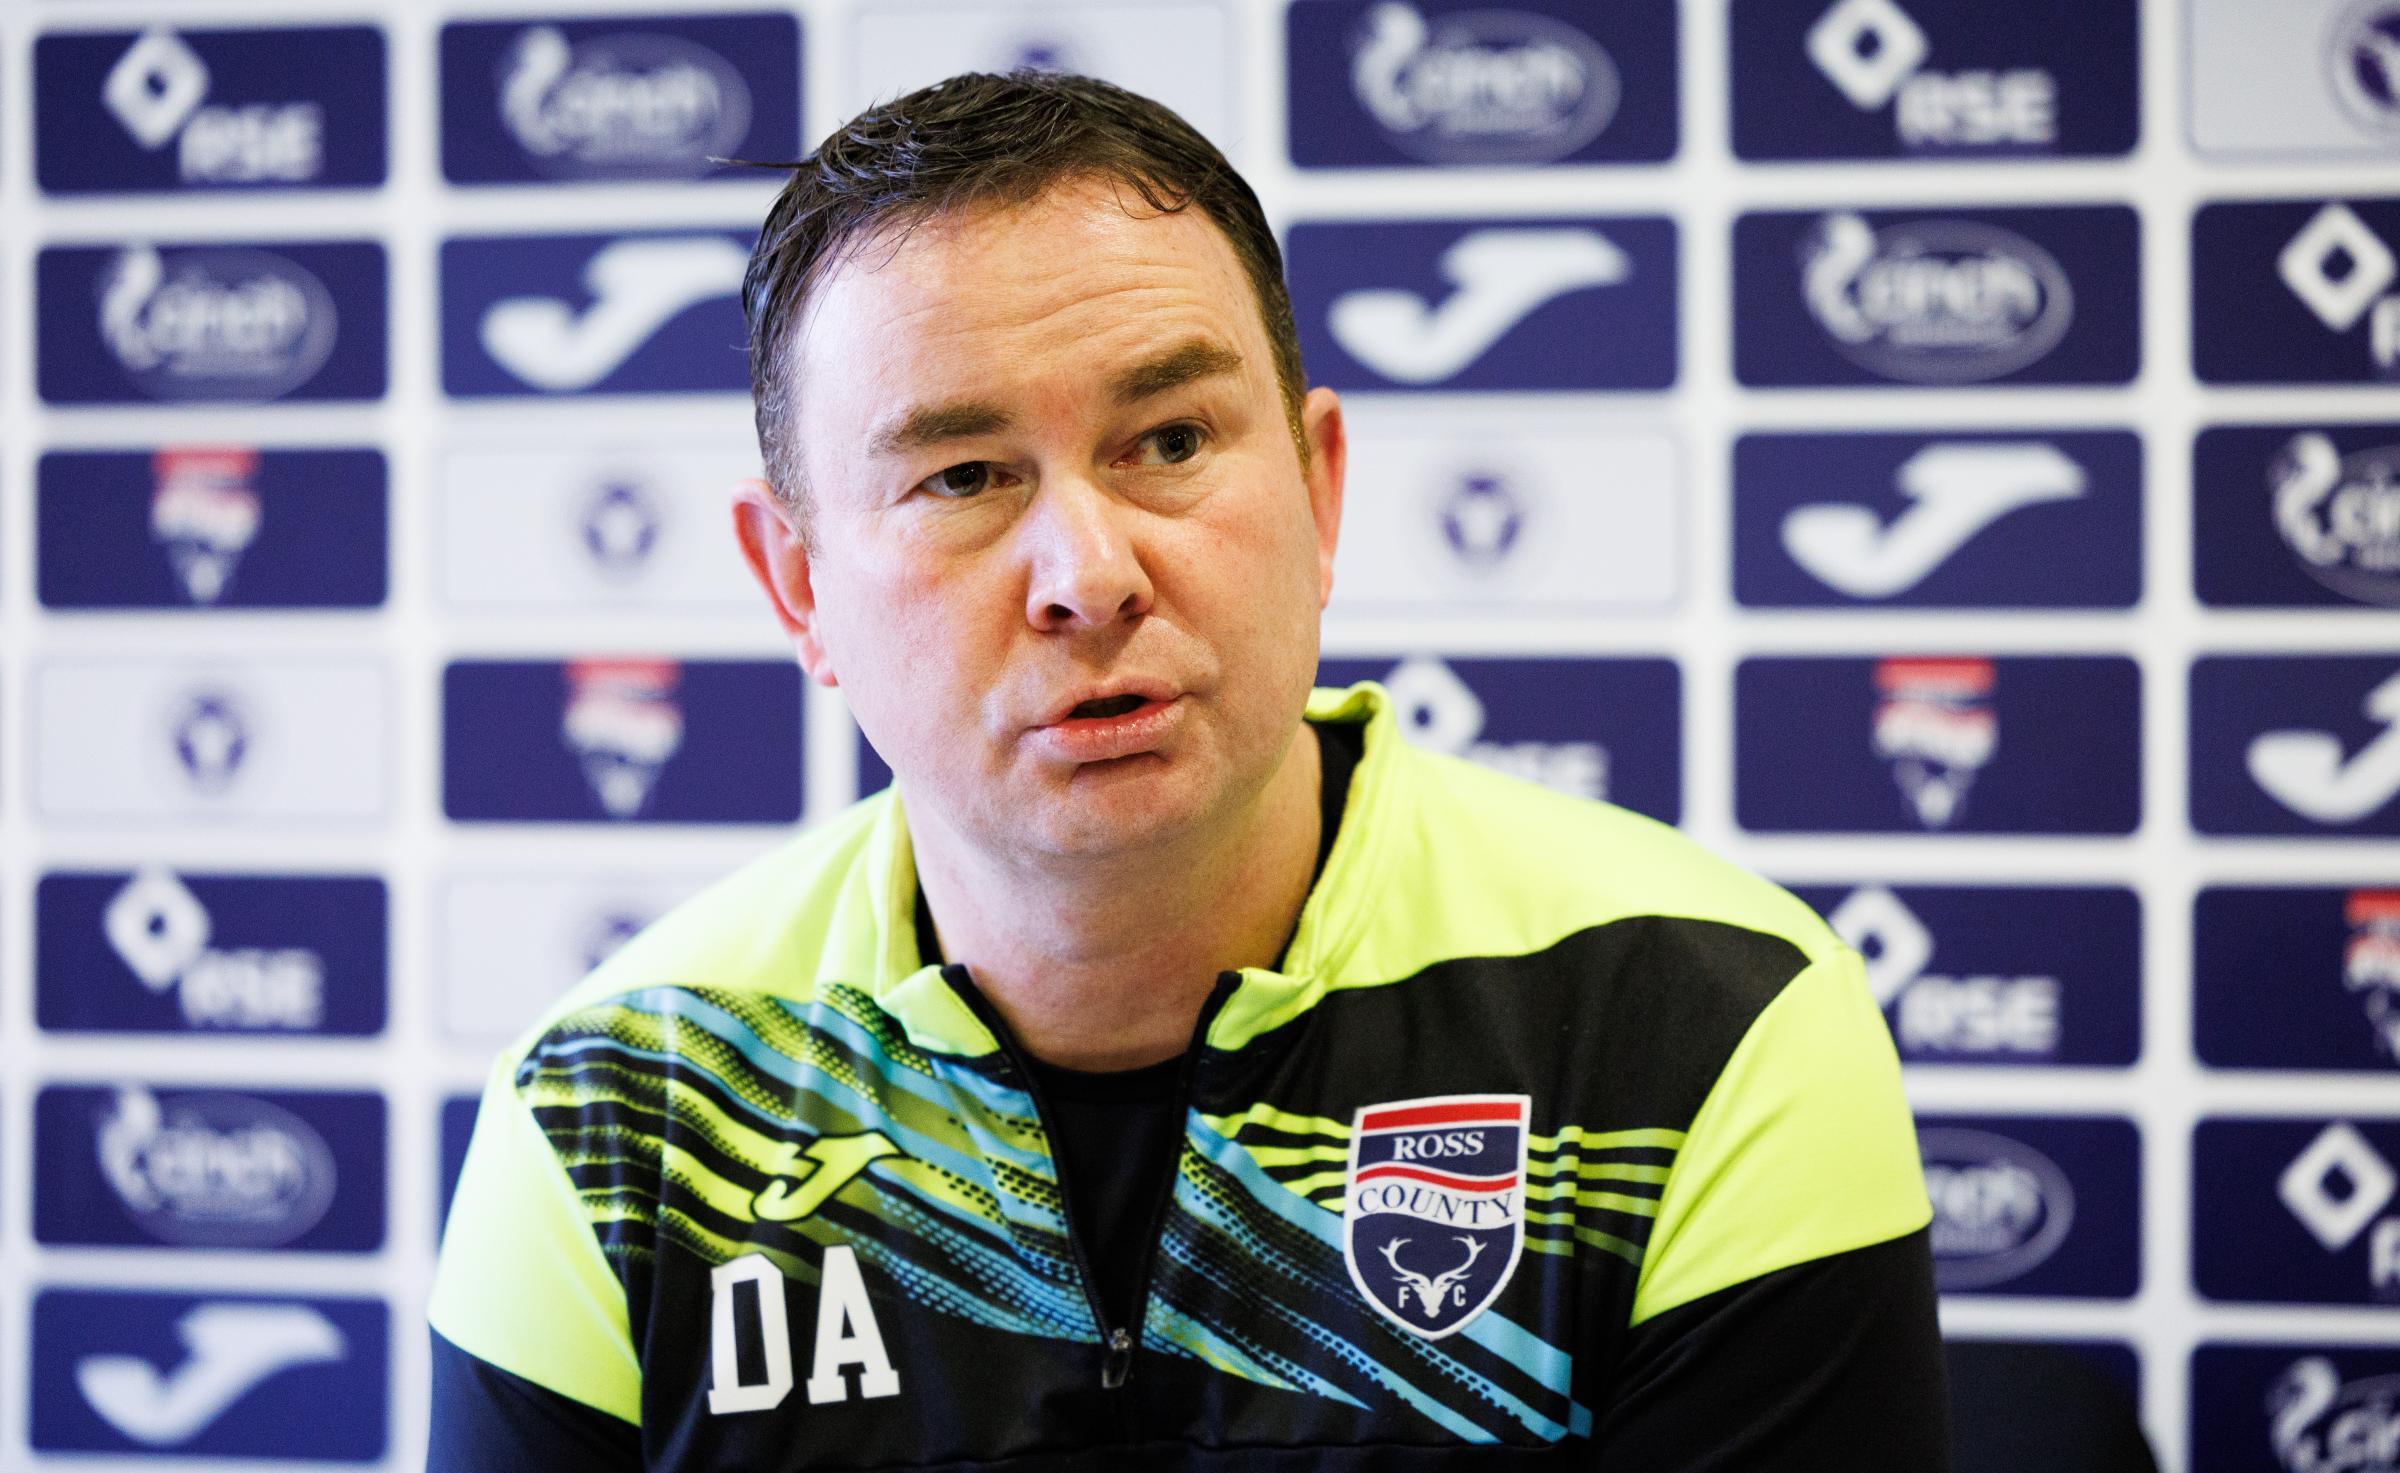 Derek Adams wants County to build on Celtic performance at Livingston